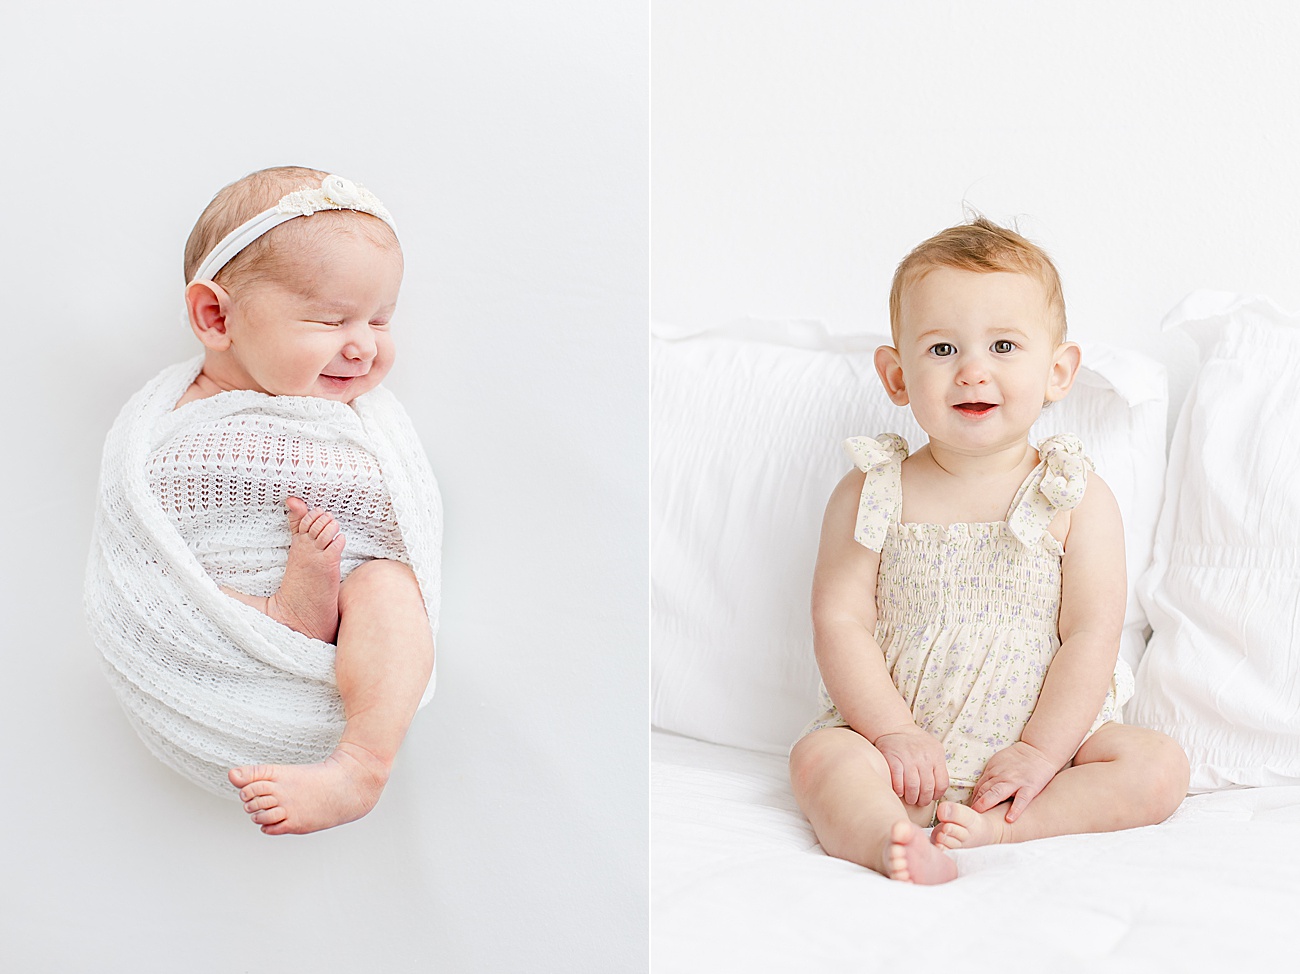 Side-by-side images of baby during newborn session and one year milestone session with Austin family photographer, Sana Ahmed Photography.